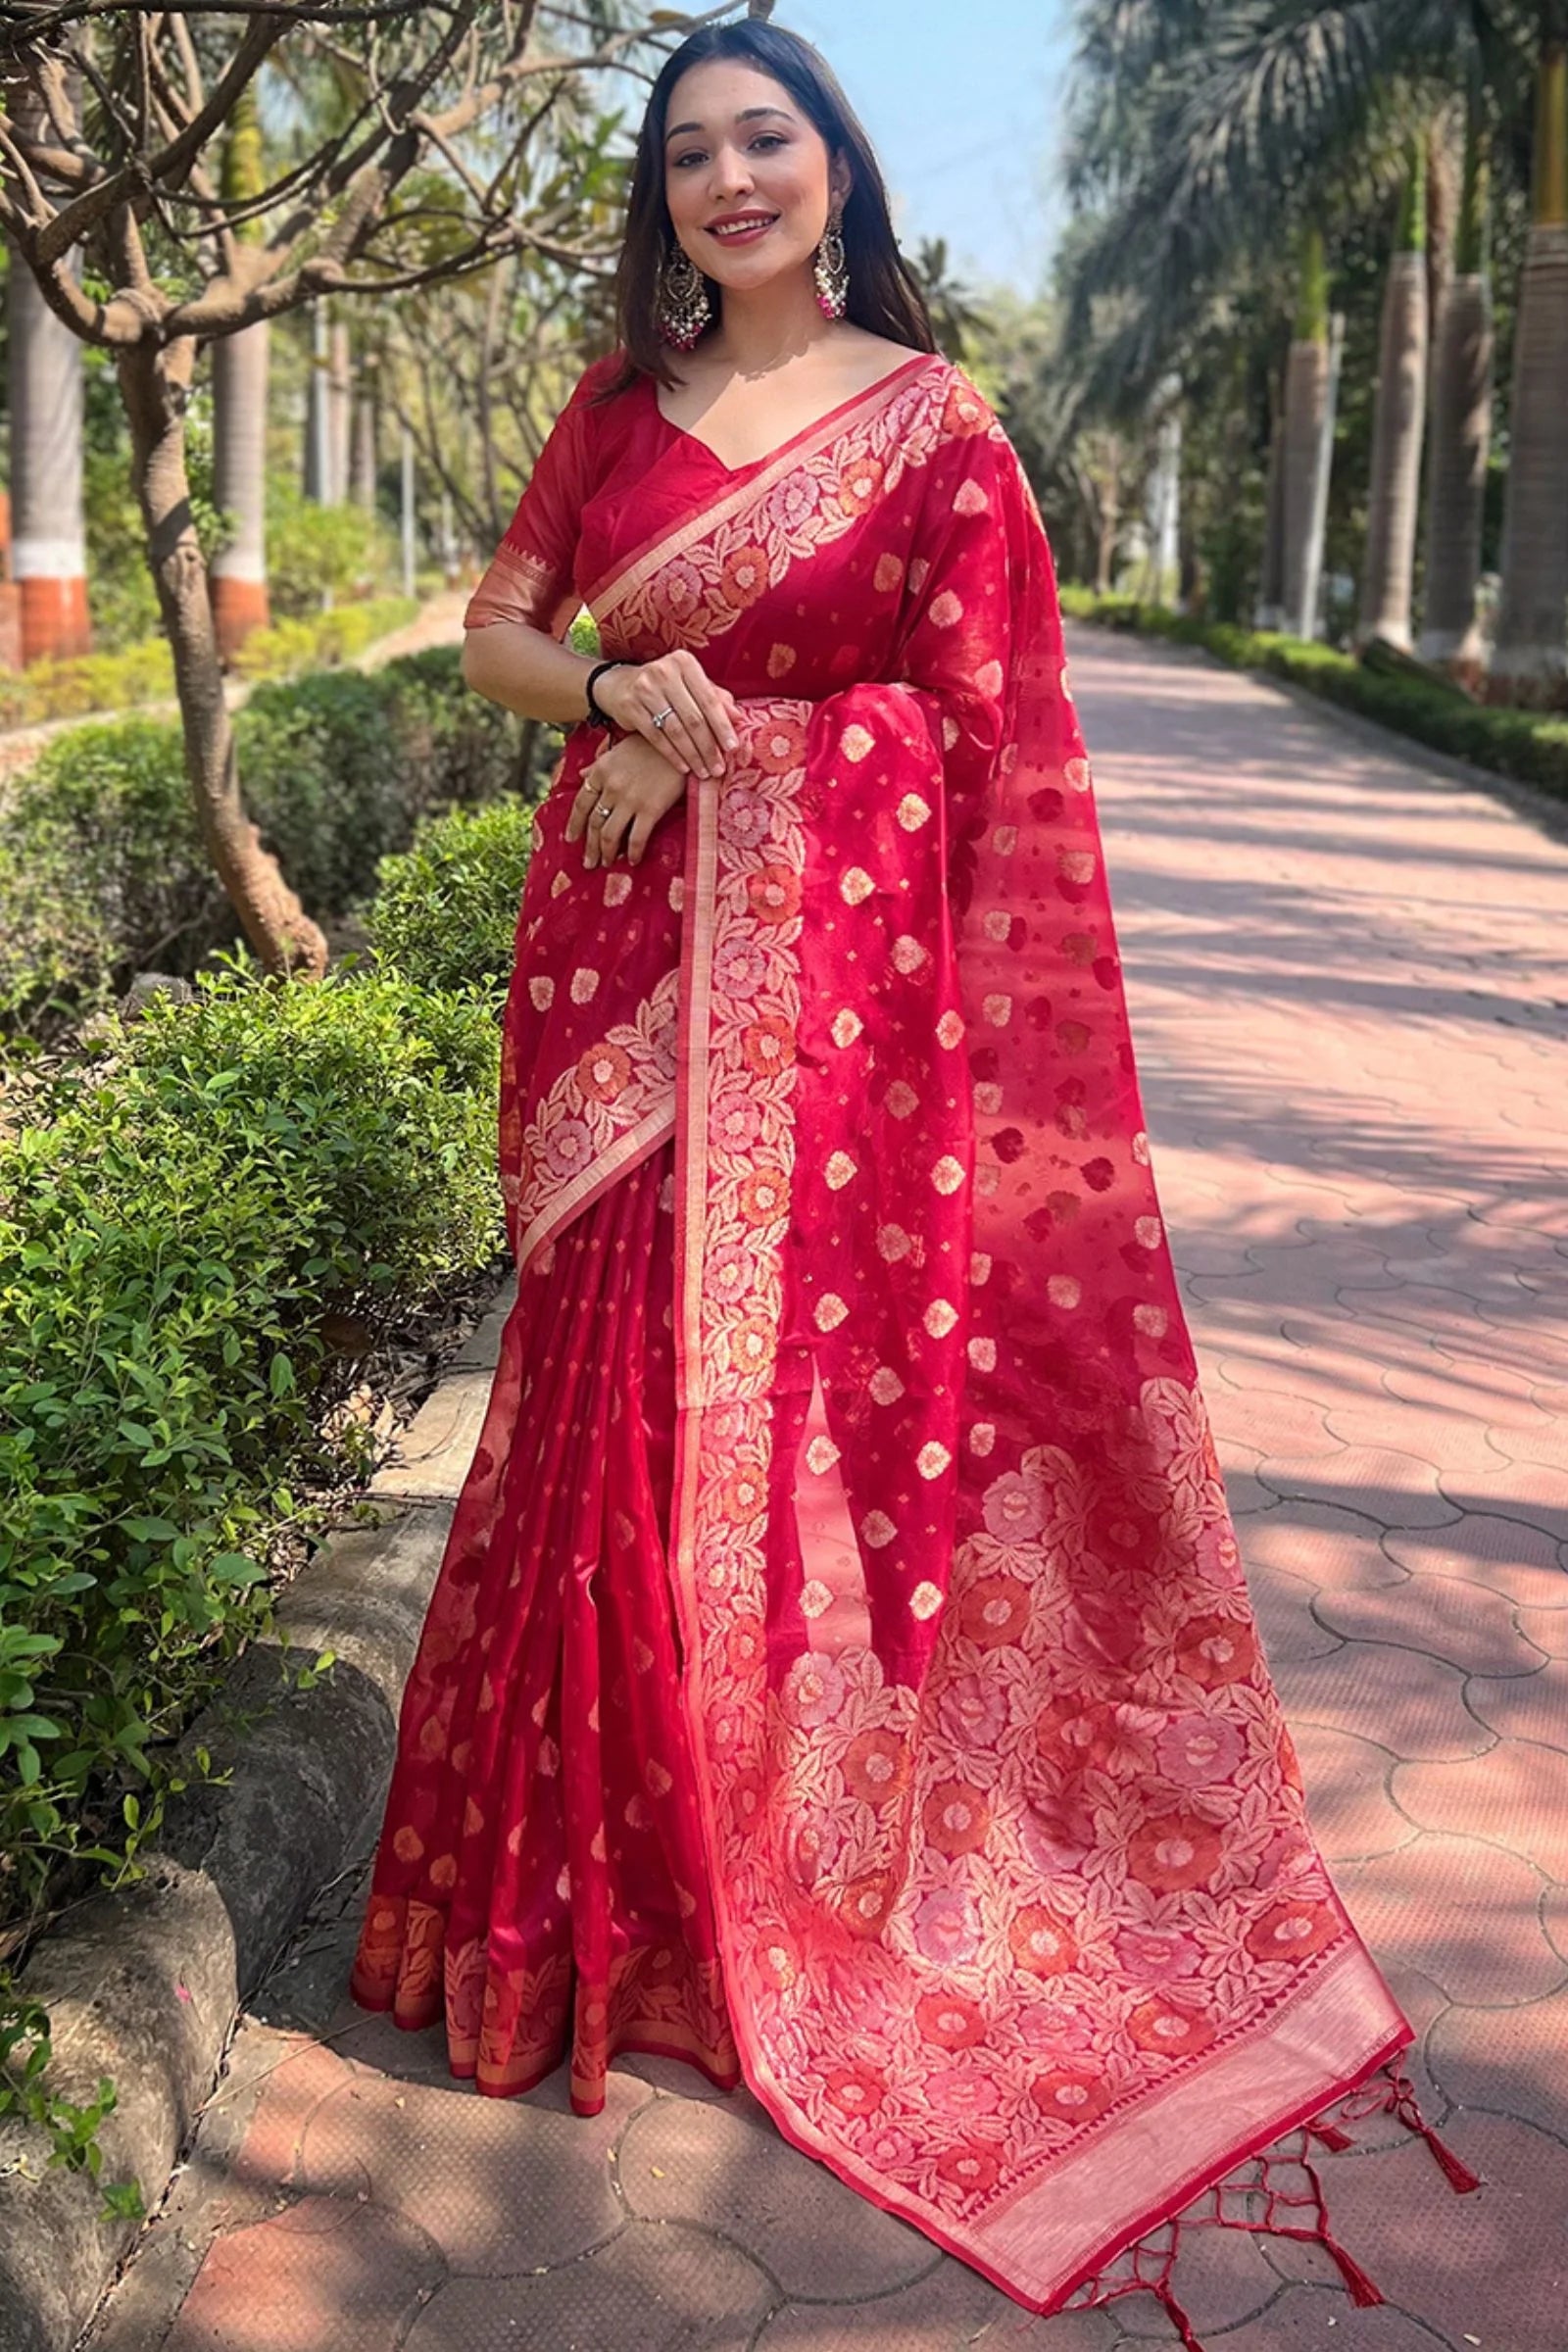 5 Trendy Glamorous Red Party Wear Sarees